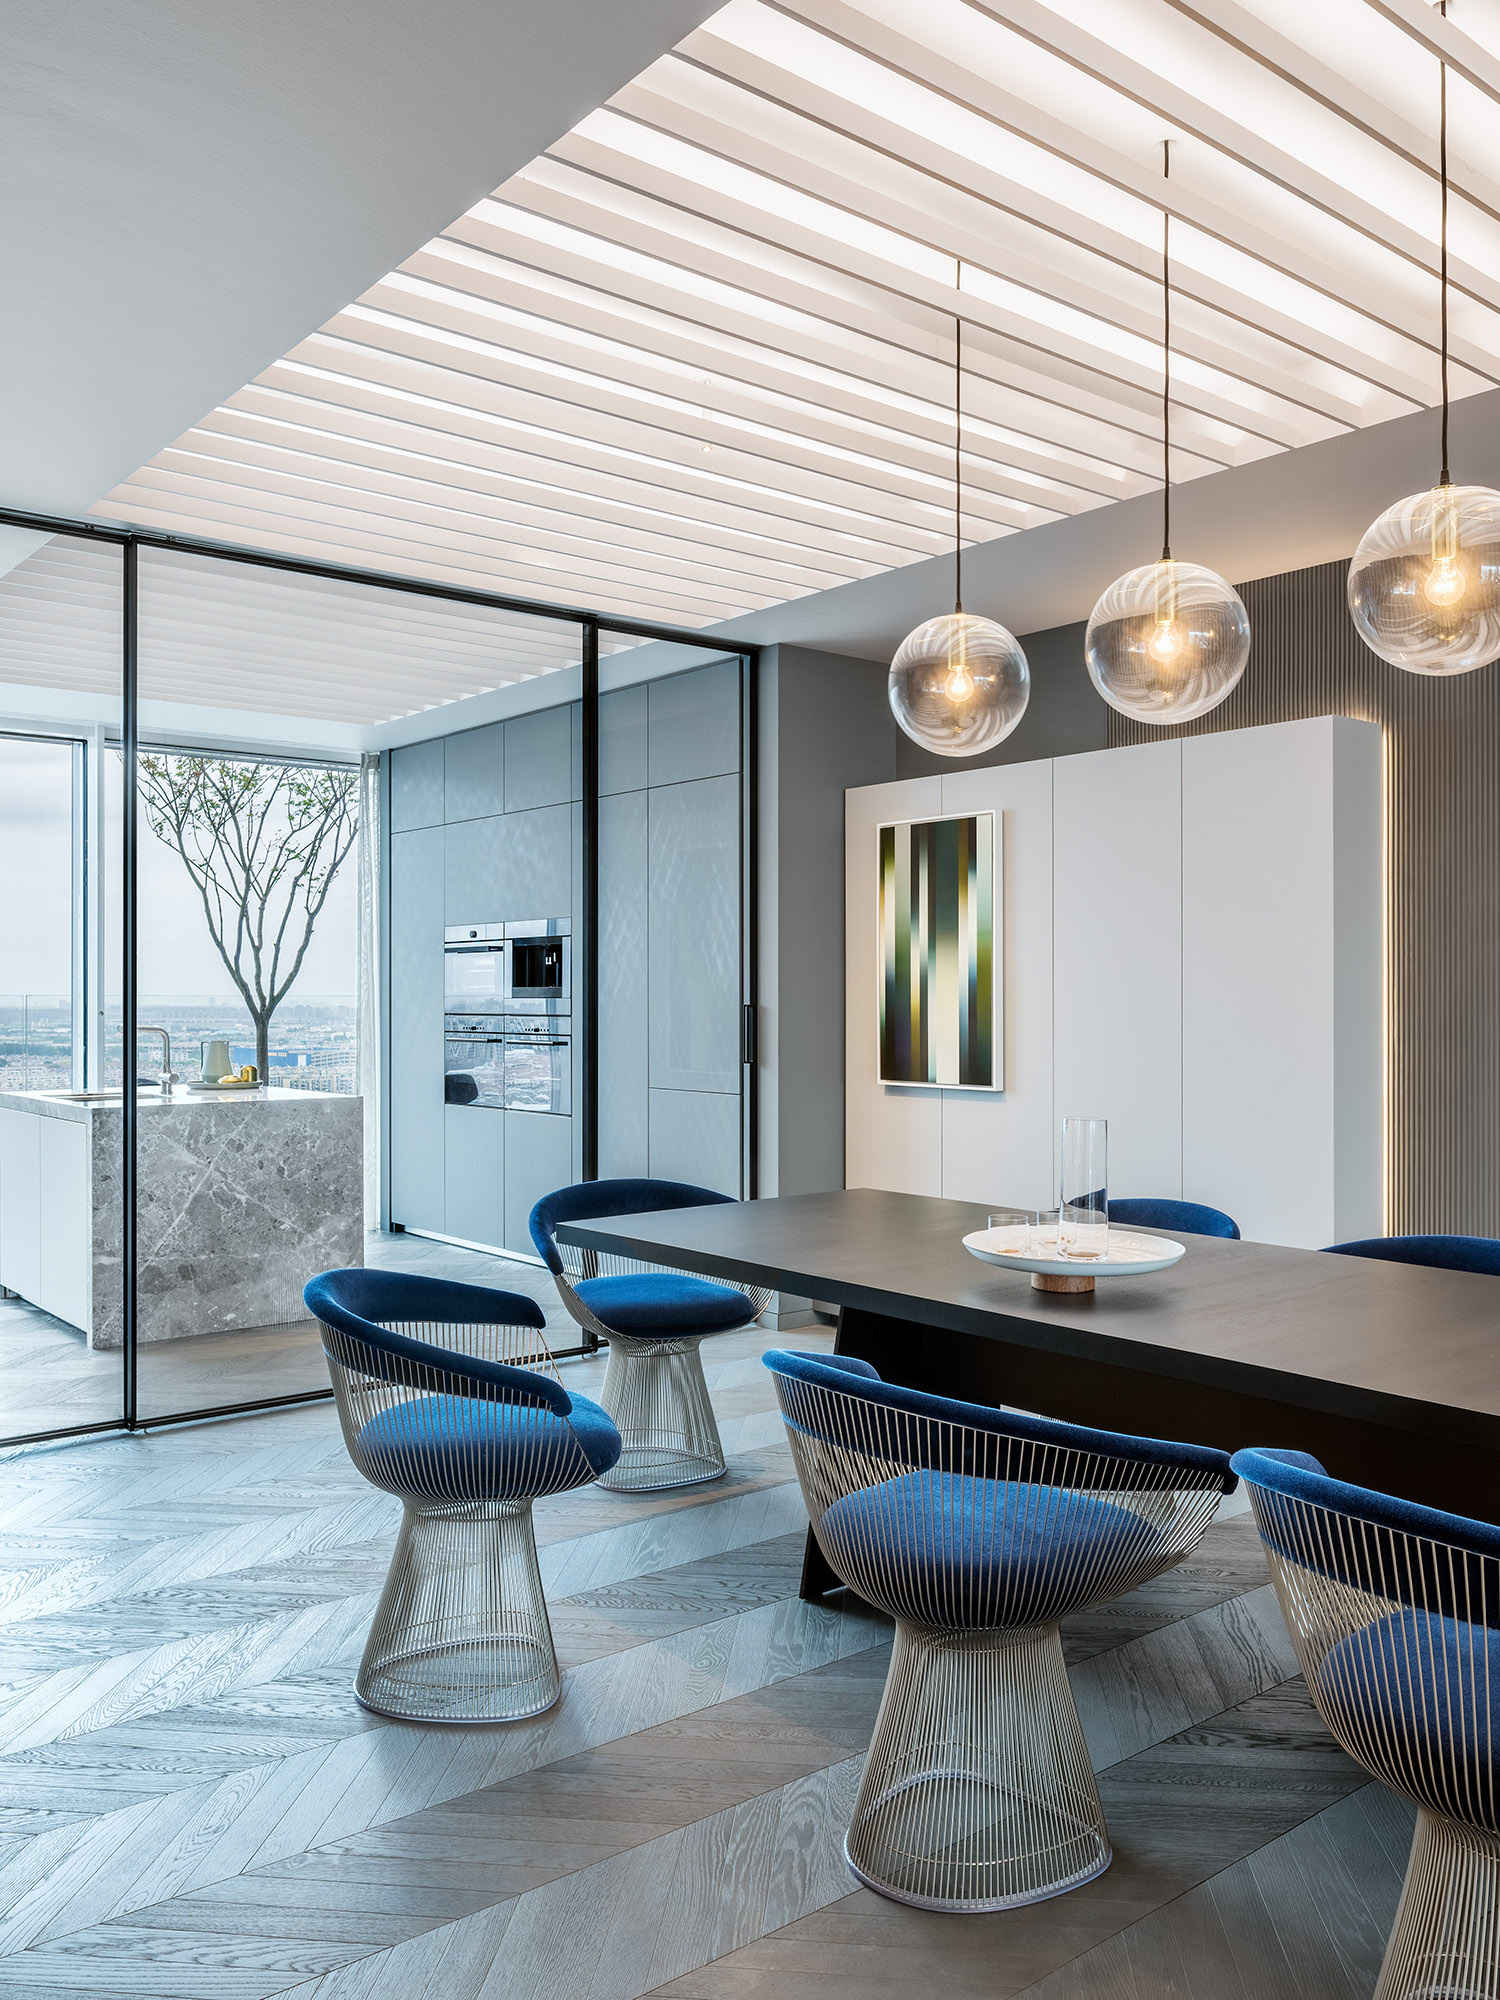 Shades of Grey Apartment Interior Design Shanghai, China - Ippolito Fleitz Group - Dining Table Kitchen View